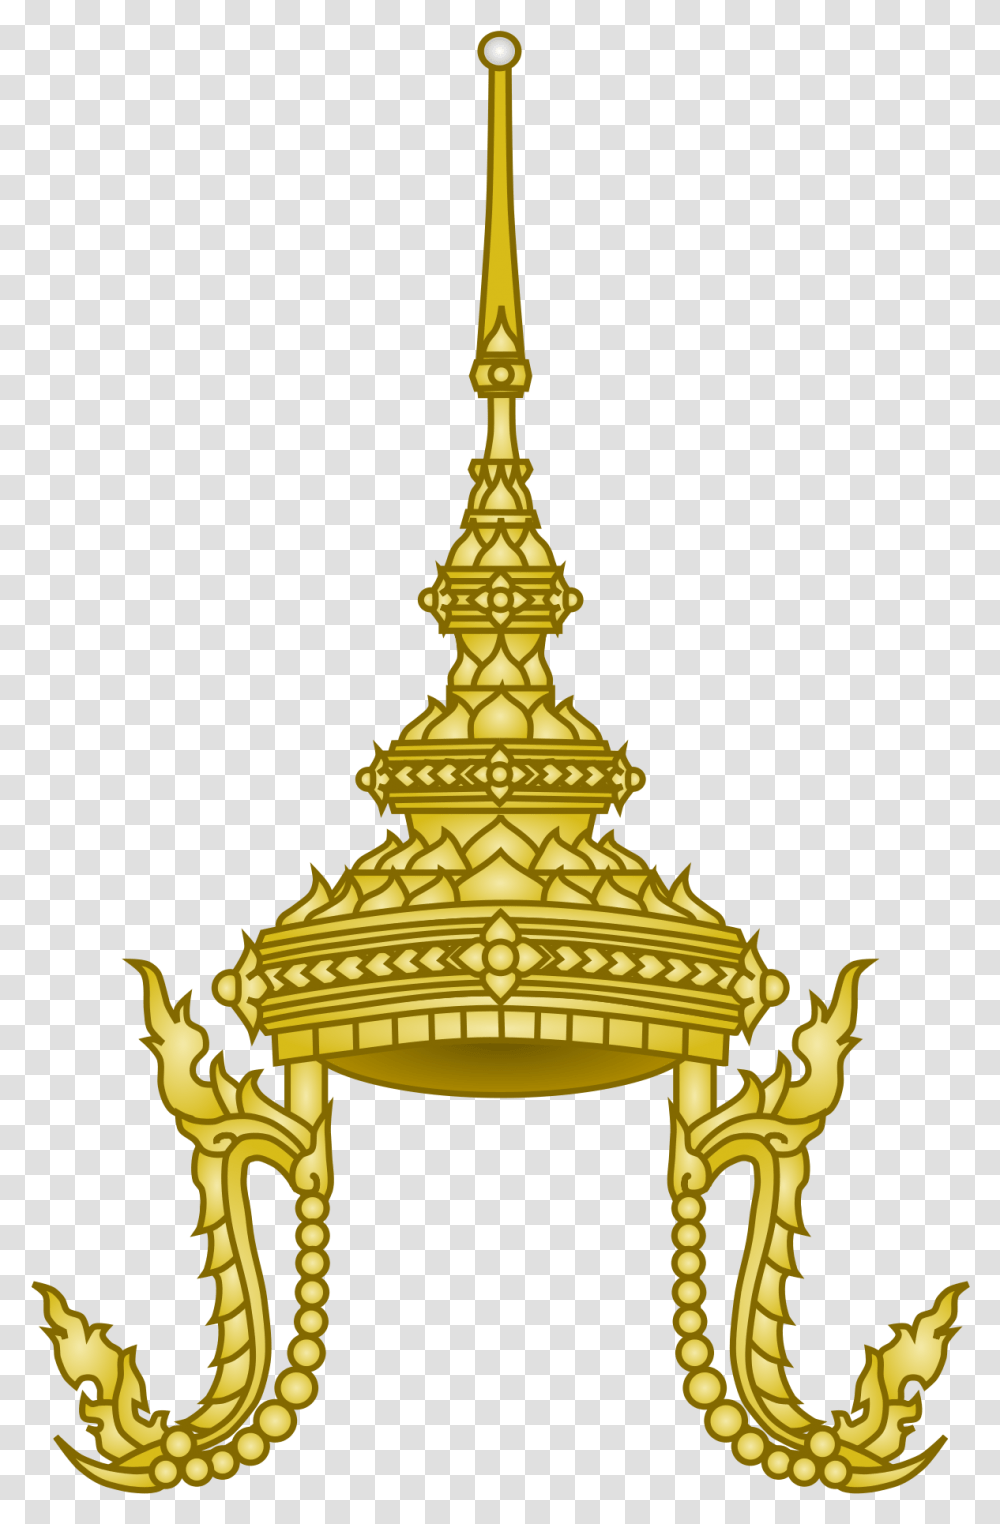 Filegreat Crown Of Victory Heraldrysvg Wikipedia Royal Thai Navy, Bronze, Gold, Architecture, Building Transparent Png